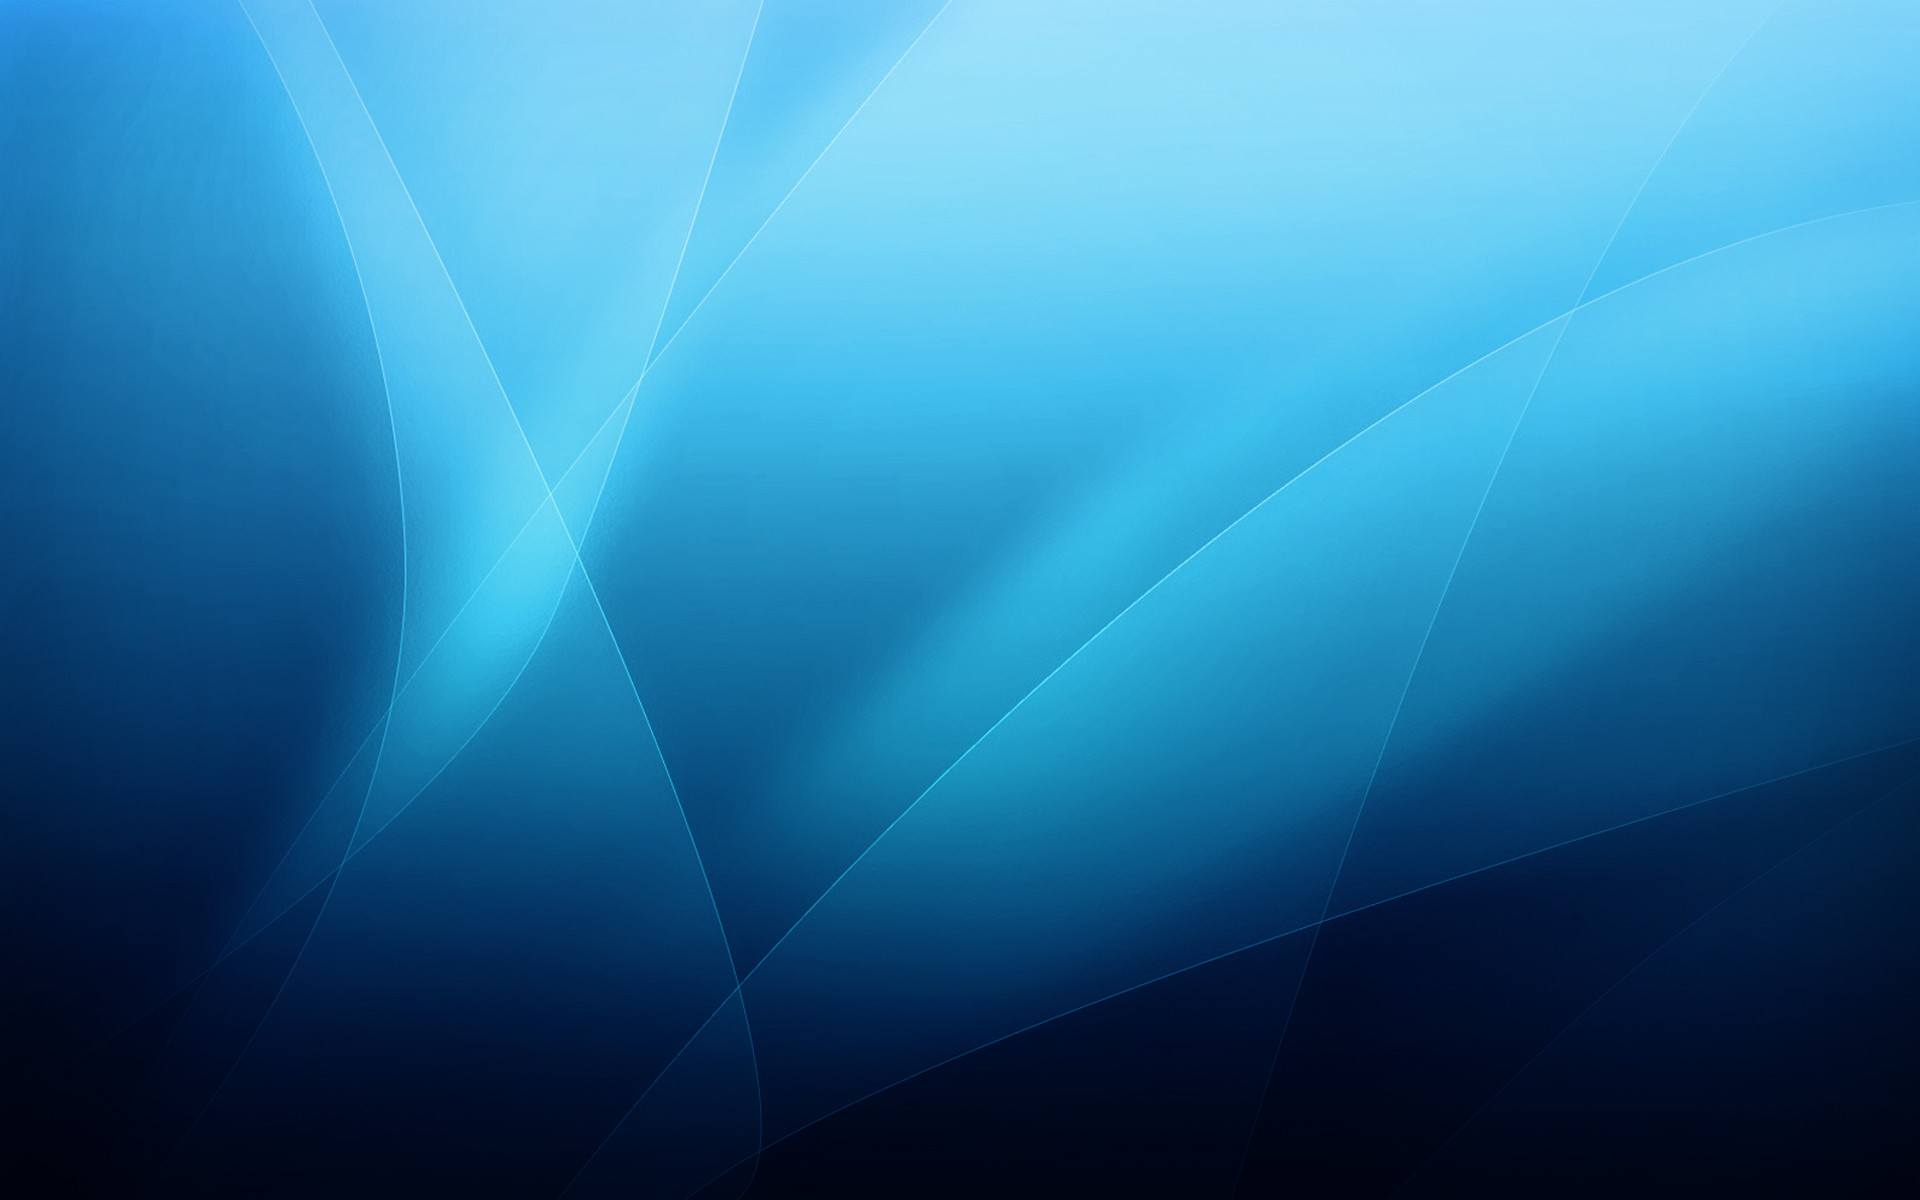 Download Aqua Clear Wallpaper HD Widescreen Wallpaper from the above resolutions. If you don